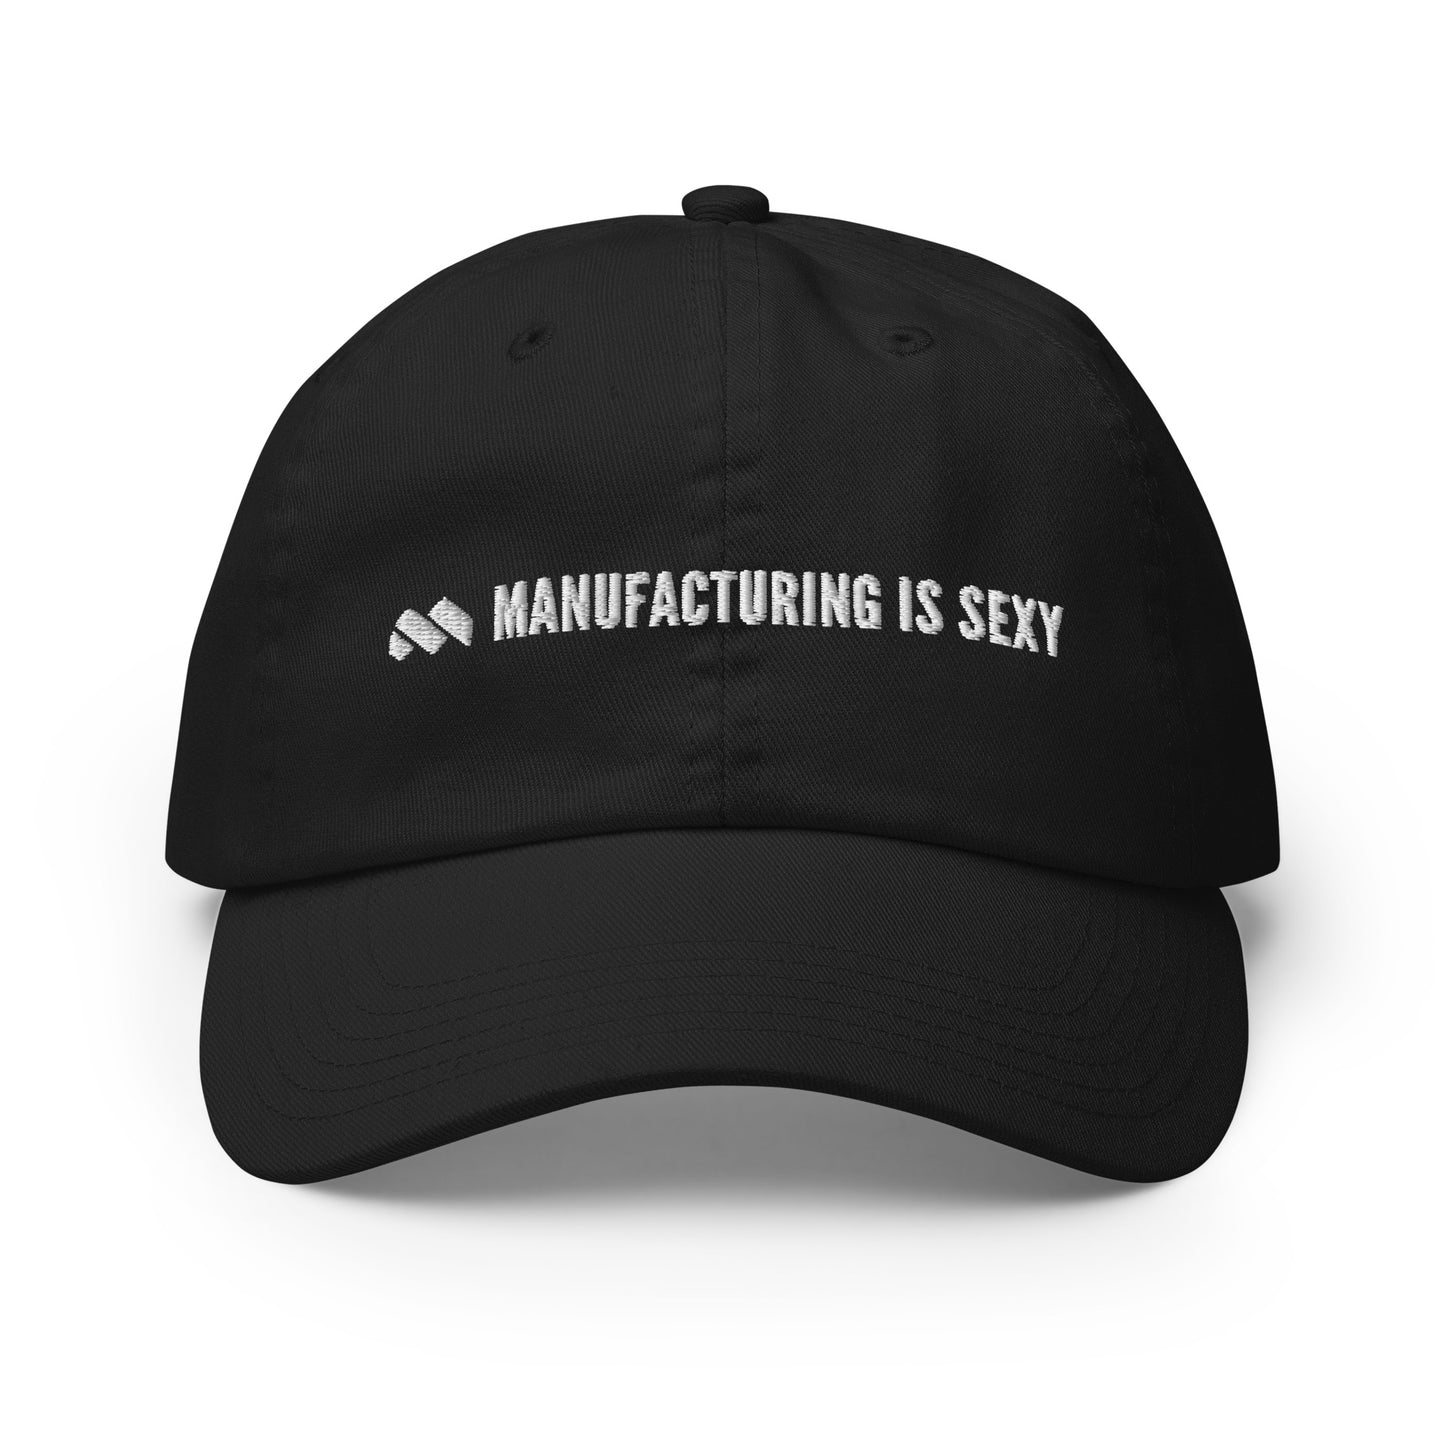 Manufacturing is sexy - Champion Cap